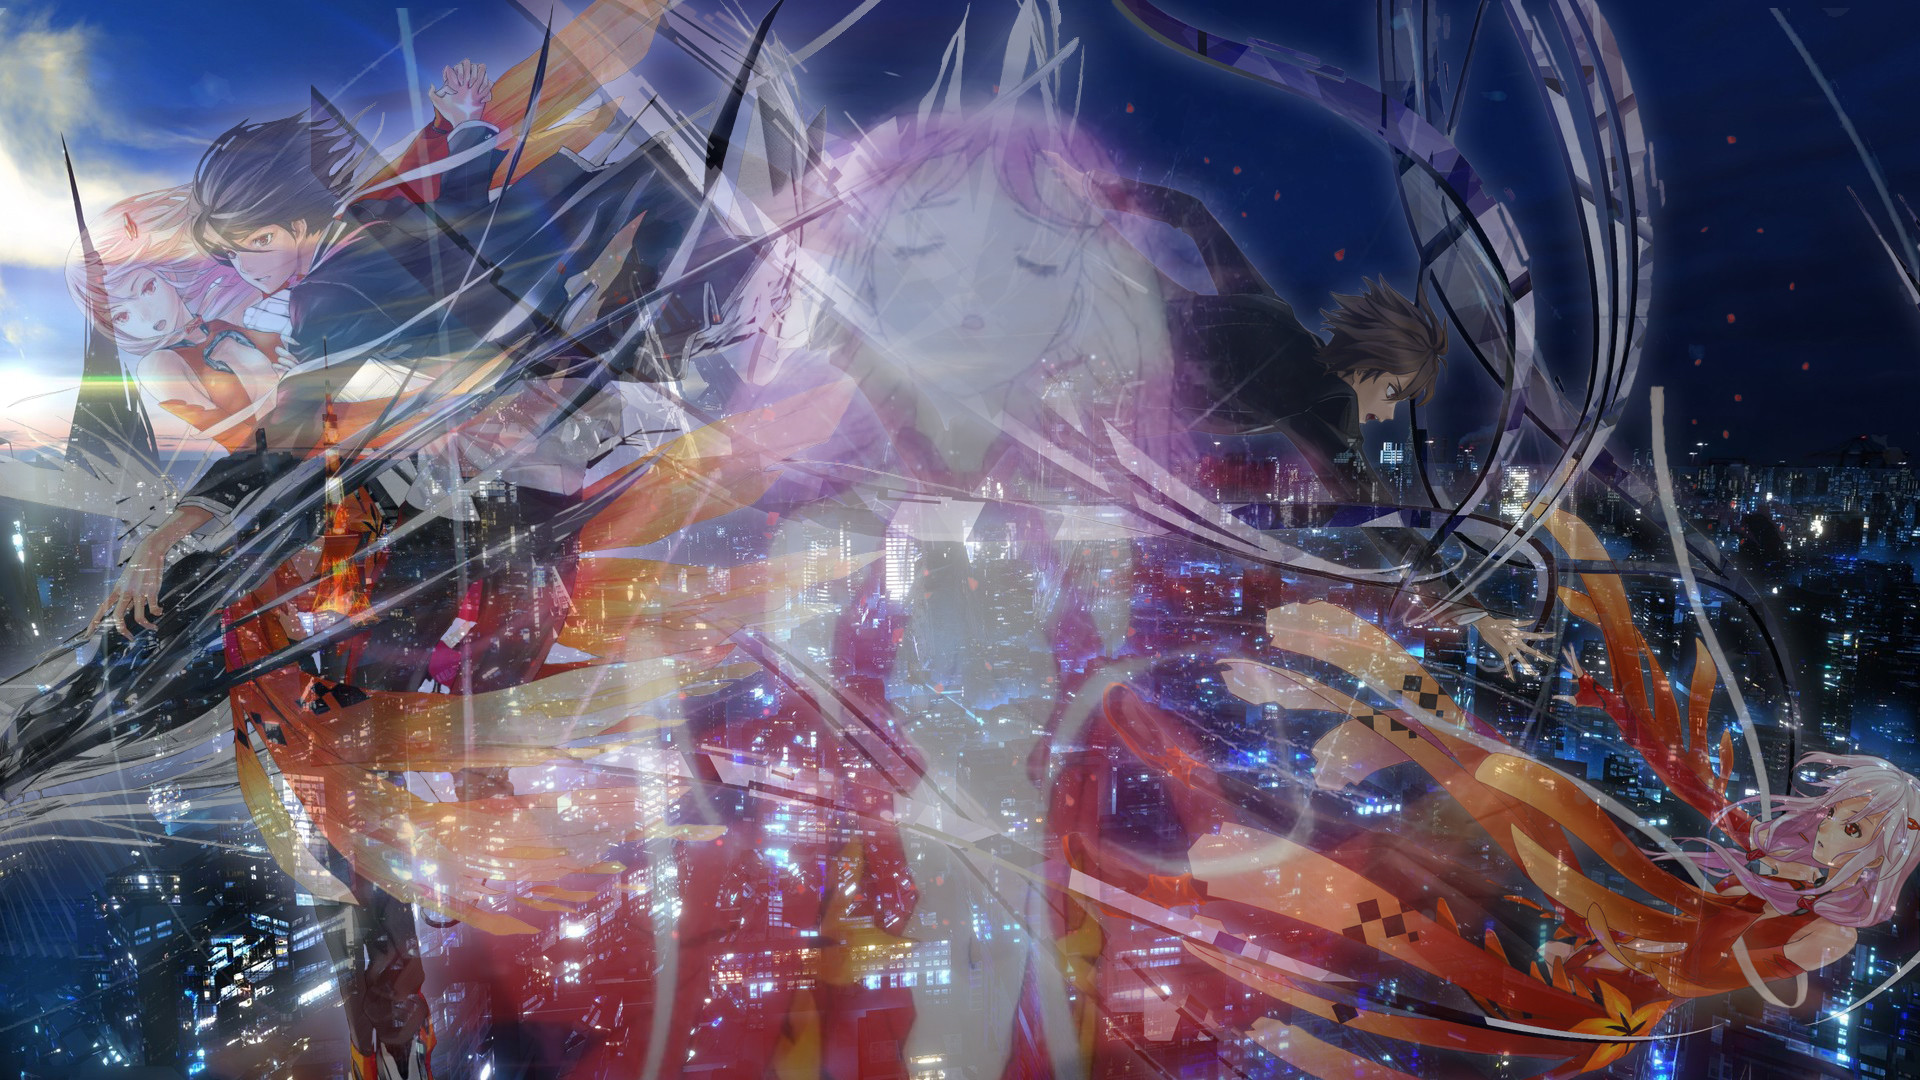 1920x1080 Guilty Crown Wallpaper by Tigersight Guilty Crown Wallpaper by Tigersight